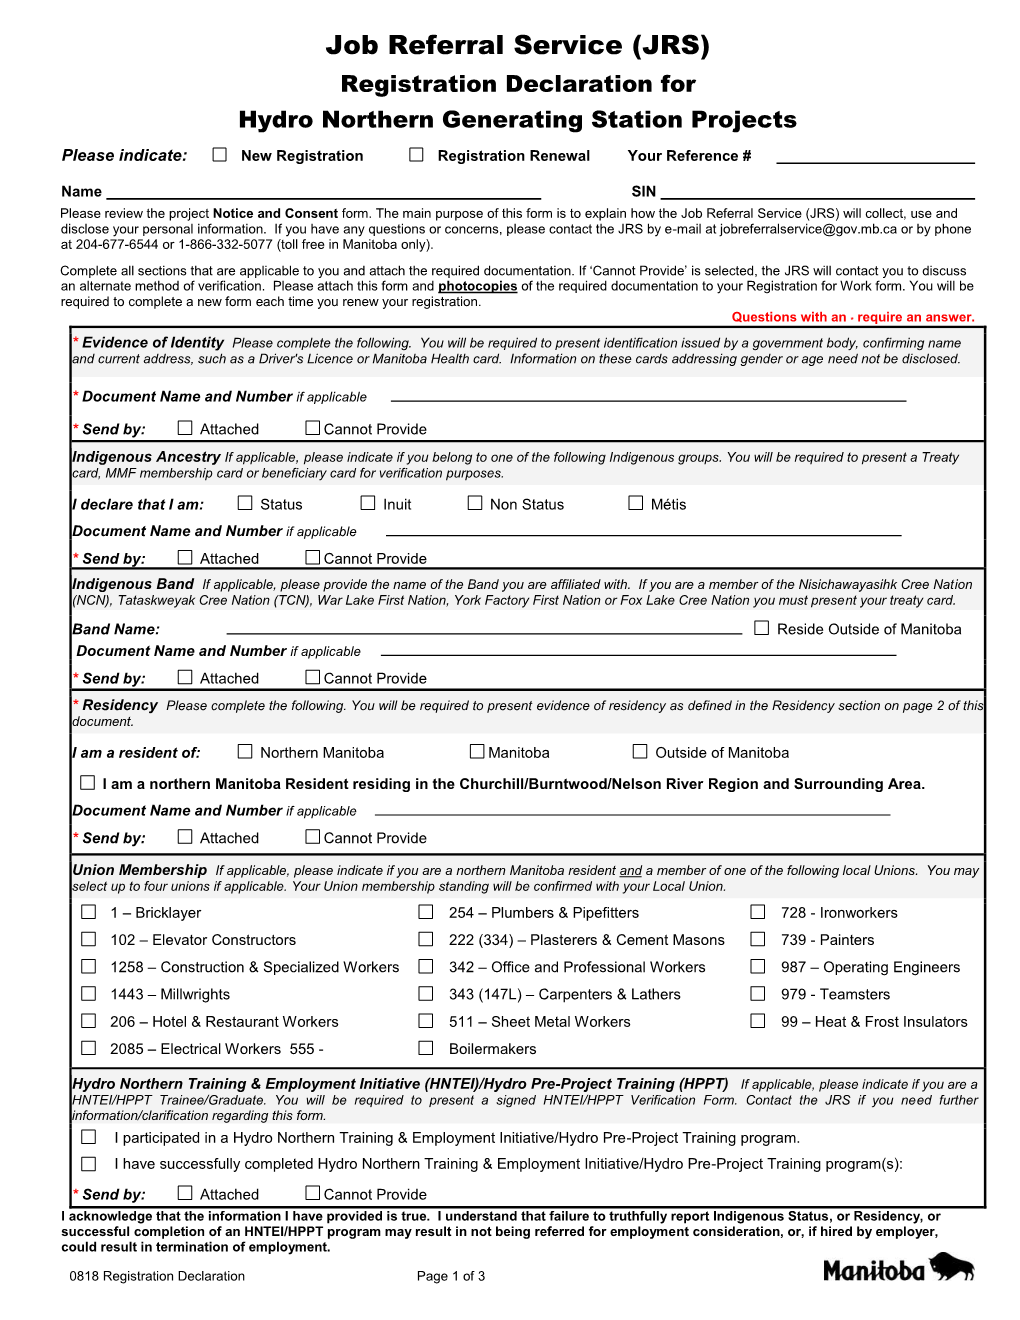 Job Referral Service (JRS) Registration Declaration for Hydro Northern Generating Station Projects